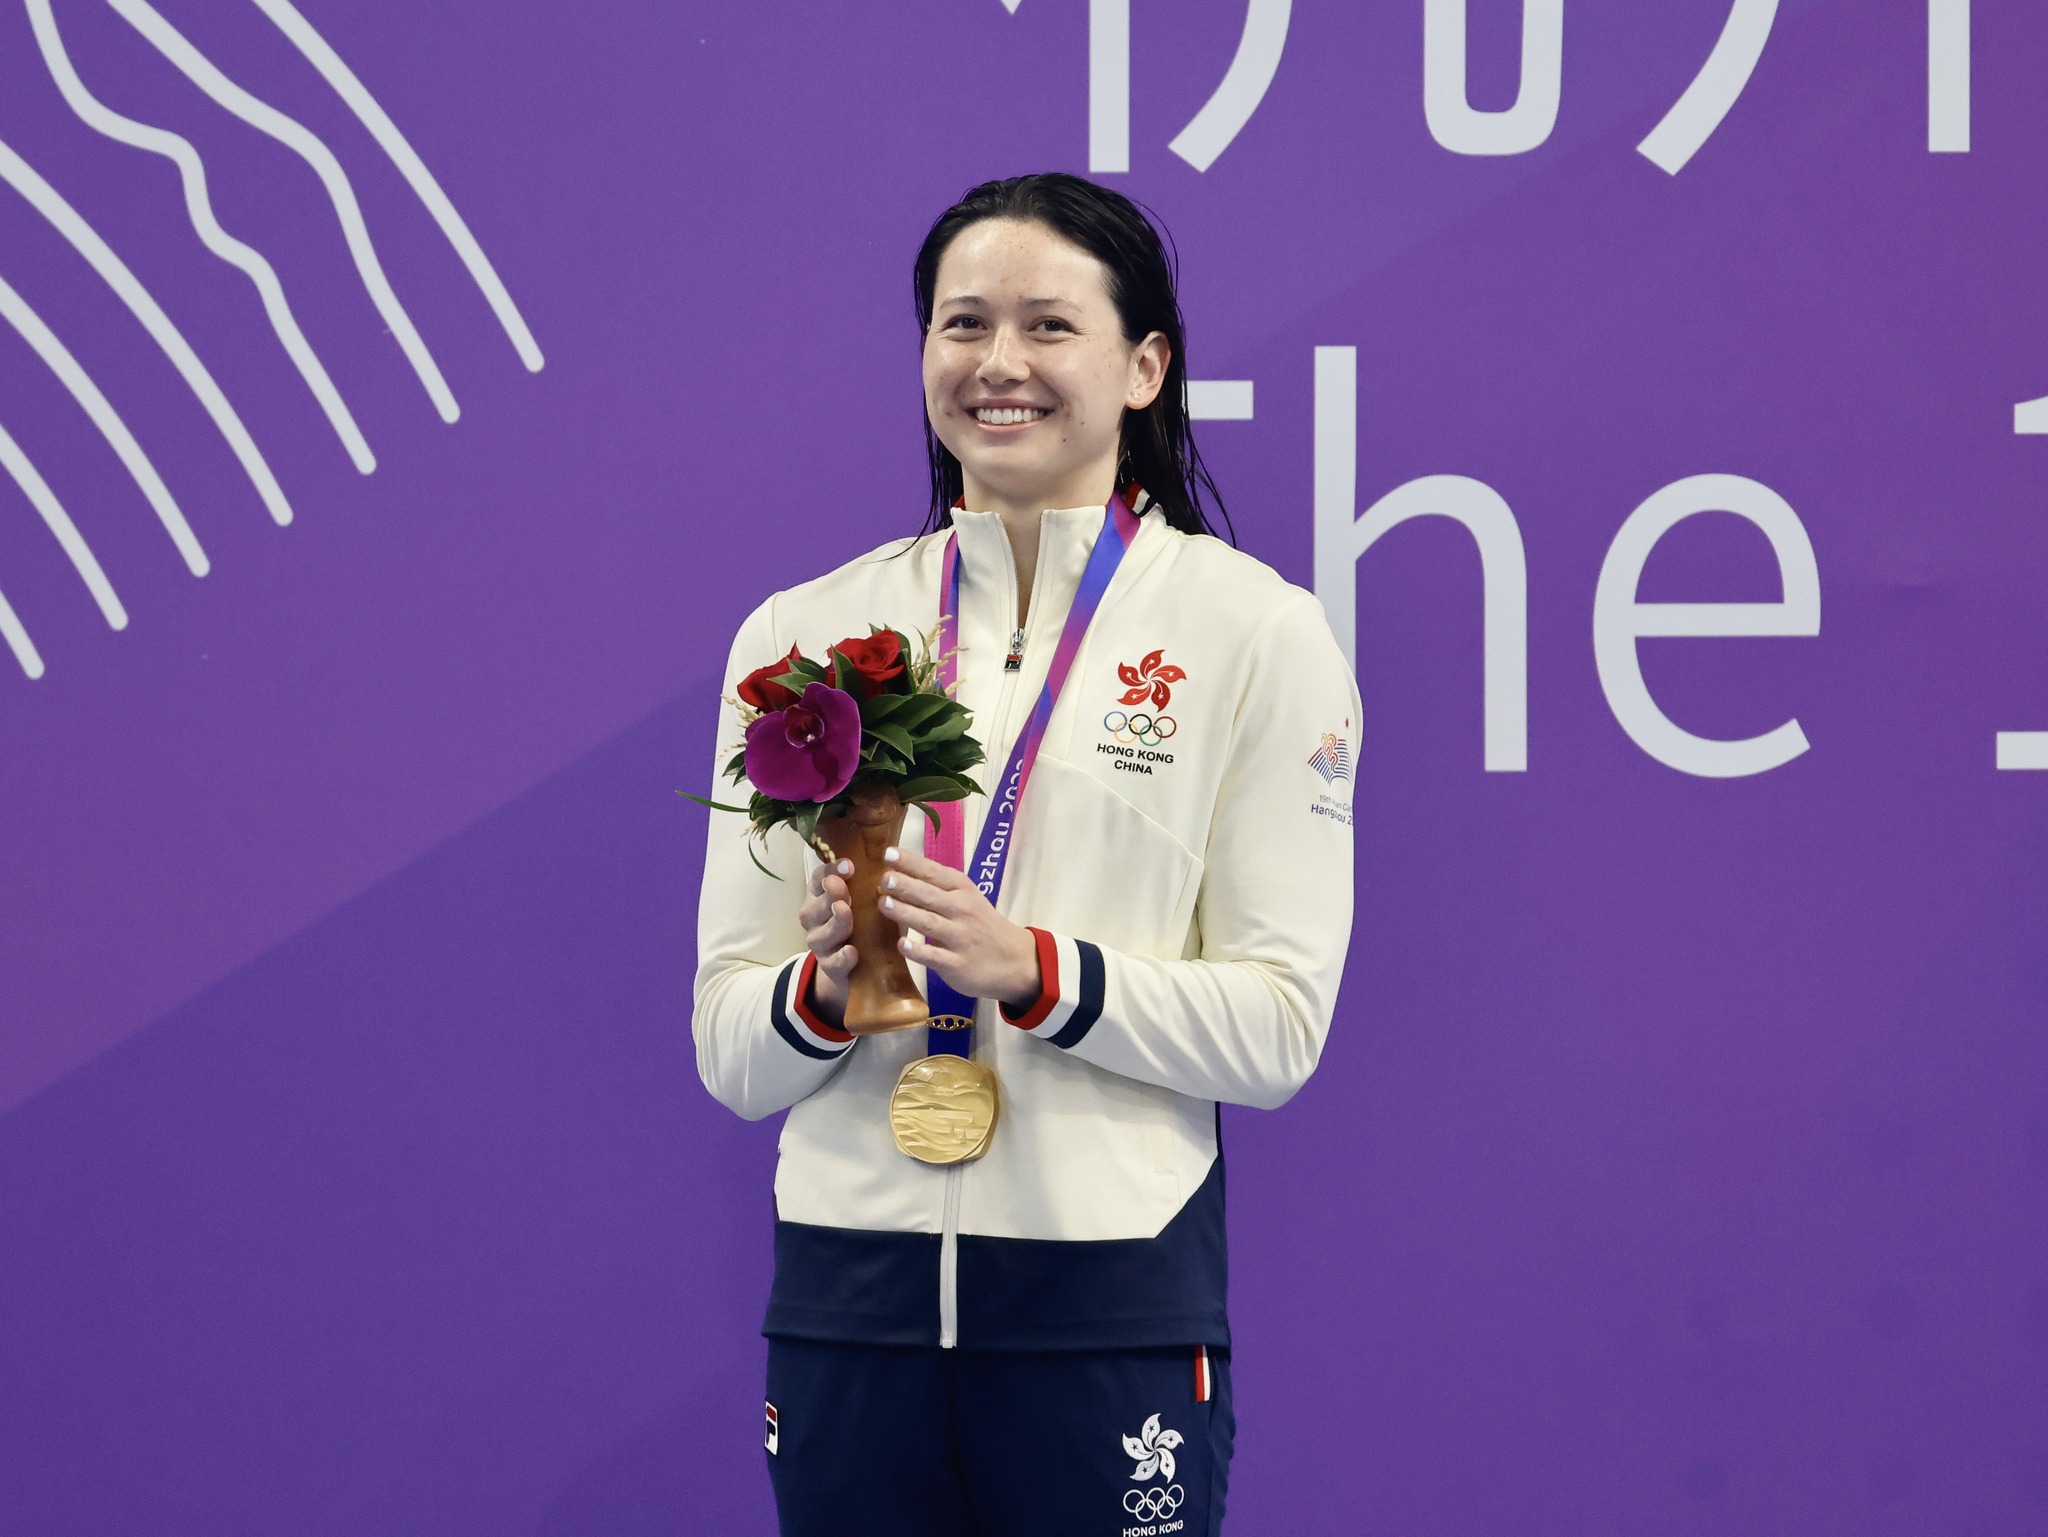 Siobhan Haughey finishes the race in 1:54.12, smashing the Asian Games record the 200m women's freestyle. (2023)